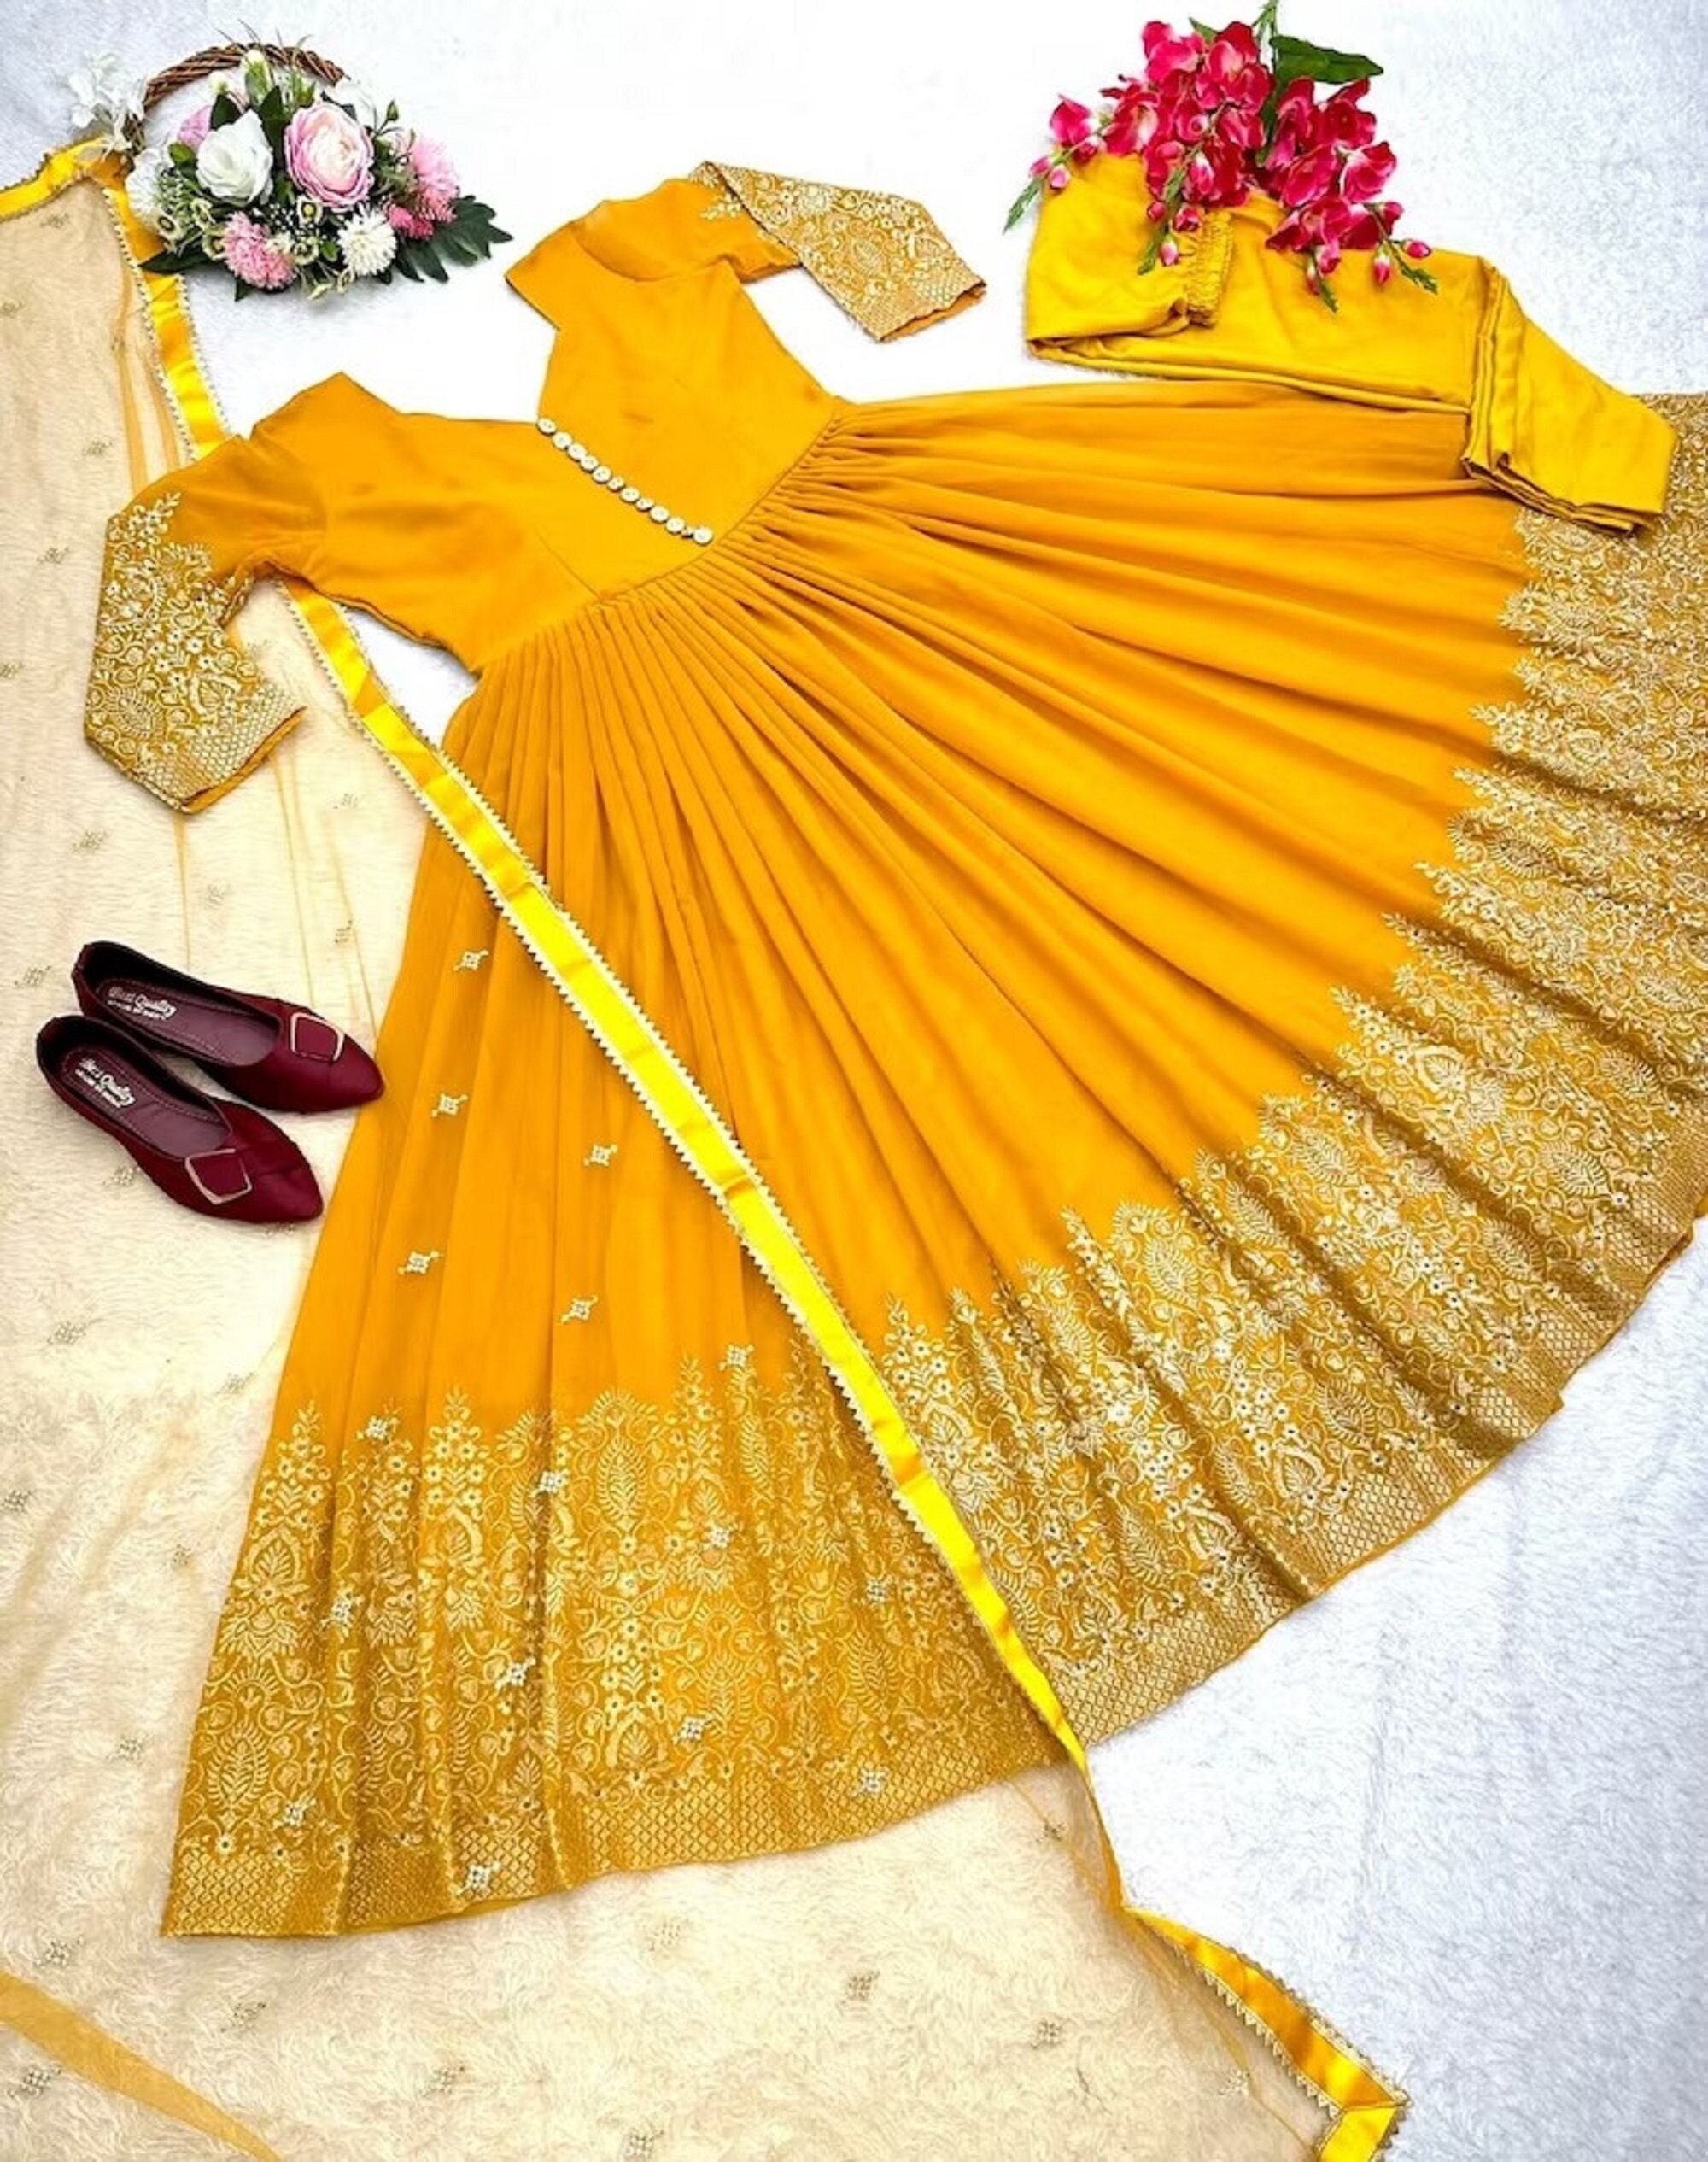 Kiara Advani looks radiant as she flaunts her post-wedding glow in this  yellow co-ord set – See photos | Hindi Movie News - Times of India